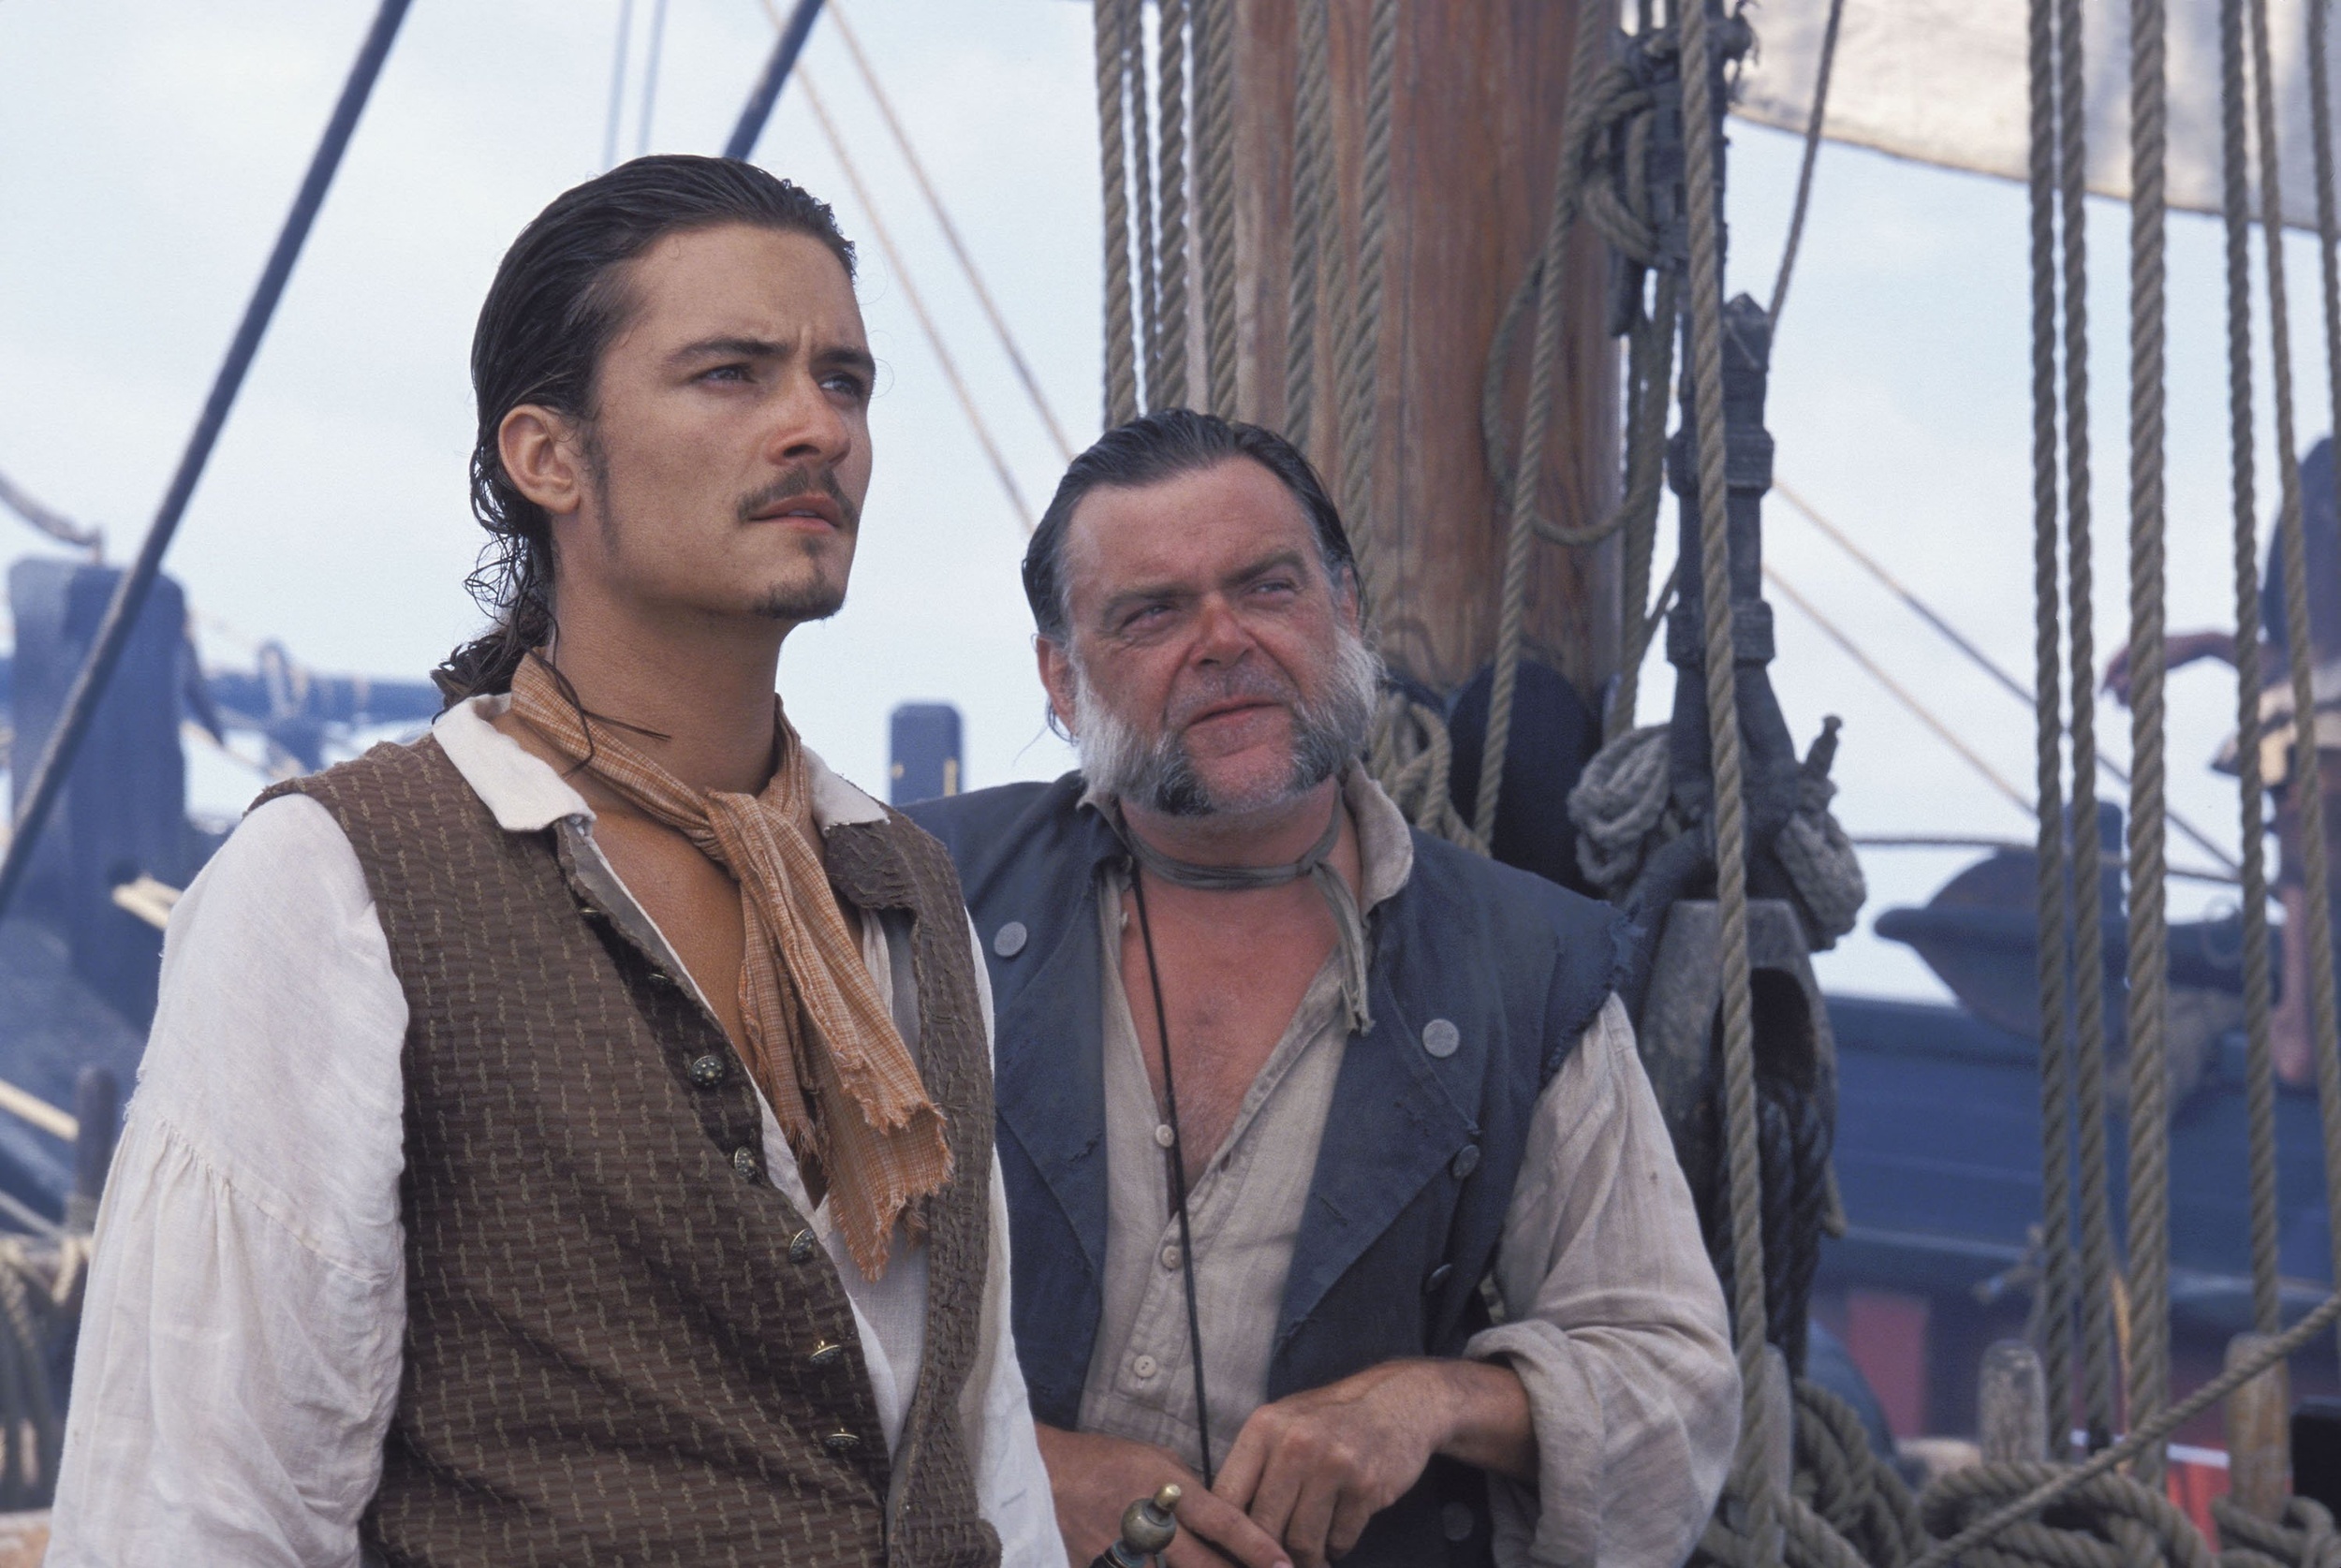 <p>Jack Sparrow is the showy role, but Will Turner is the classic swashbuckling hero of the piece. Names such as Tobey Maguire, Jude Law, Christian Bale, and Heath Ledger were suggested, and Tom Hiddleston auditioned. Orlando Bloom would get the role, and he actually read the script because Rush had suggested it to him.</p><p><a href='https://www.msn.com/en-us/community/channel/vid-cj9pqbr0vn9in2b6ddcd8sfgpfq6x6utp44fssrv6mc2gtybw0us'>Follow us on MSN to see more of our exclusive entertainment content.</a></p>